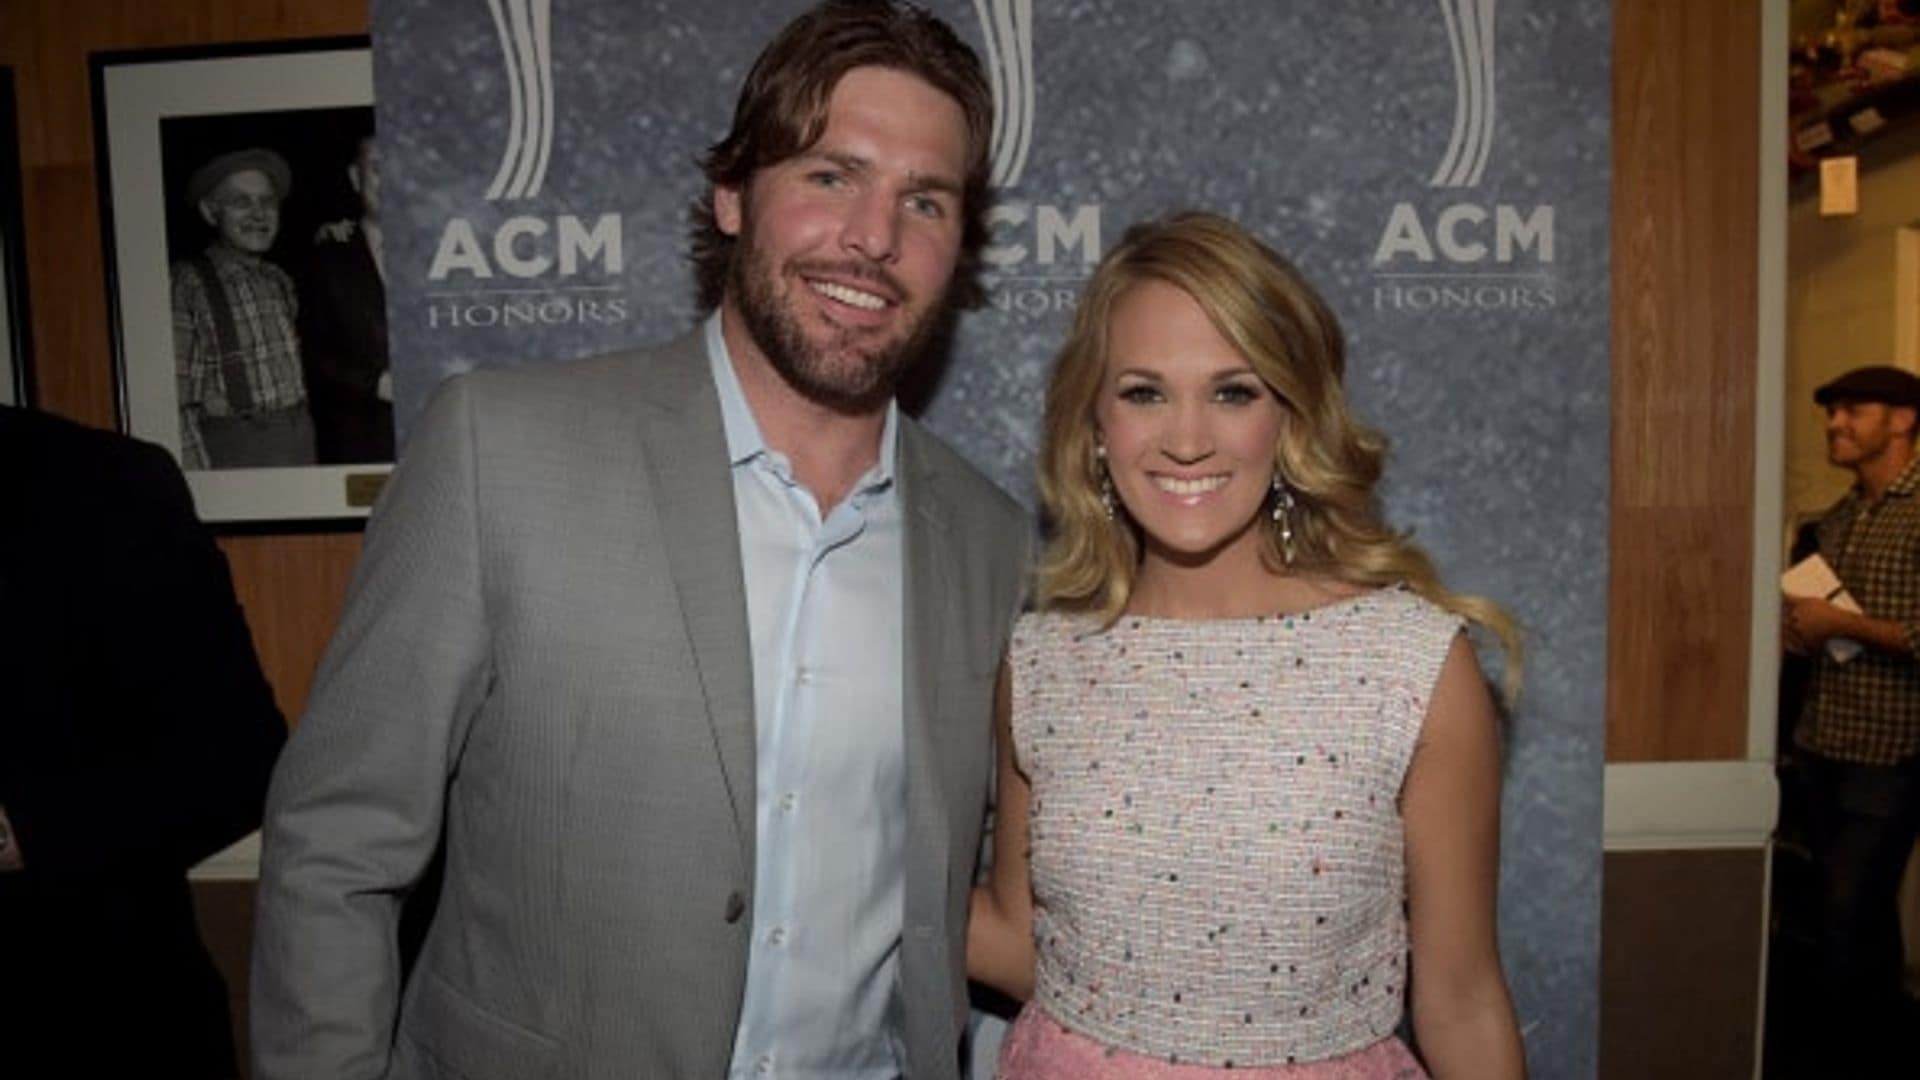 Carrie Underwood and Mike Fisher's son Isaiah is adorable: see the first pic